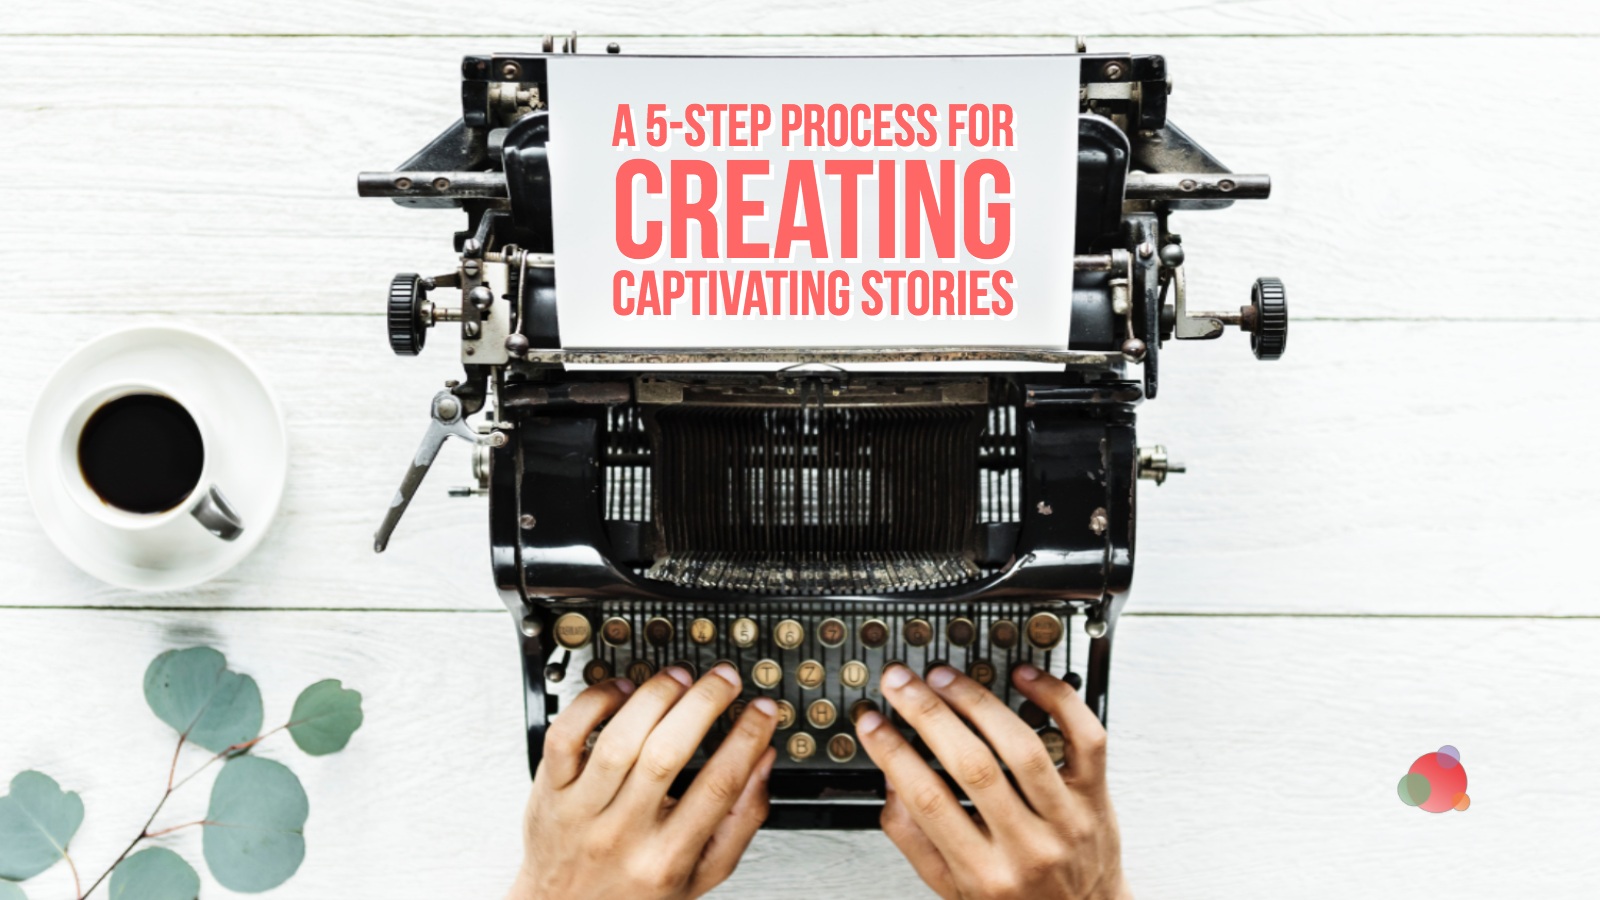 The Five-Step Process for Creative Storytelling at Work